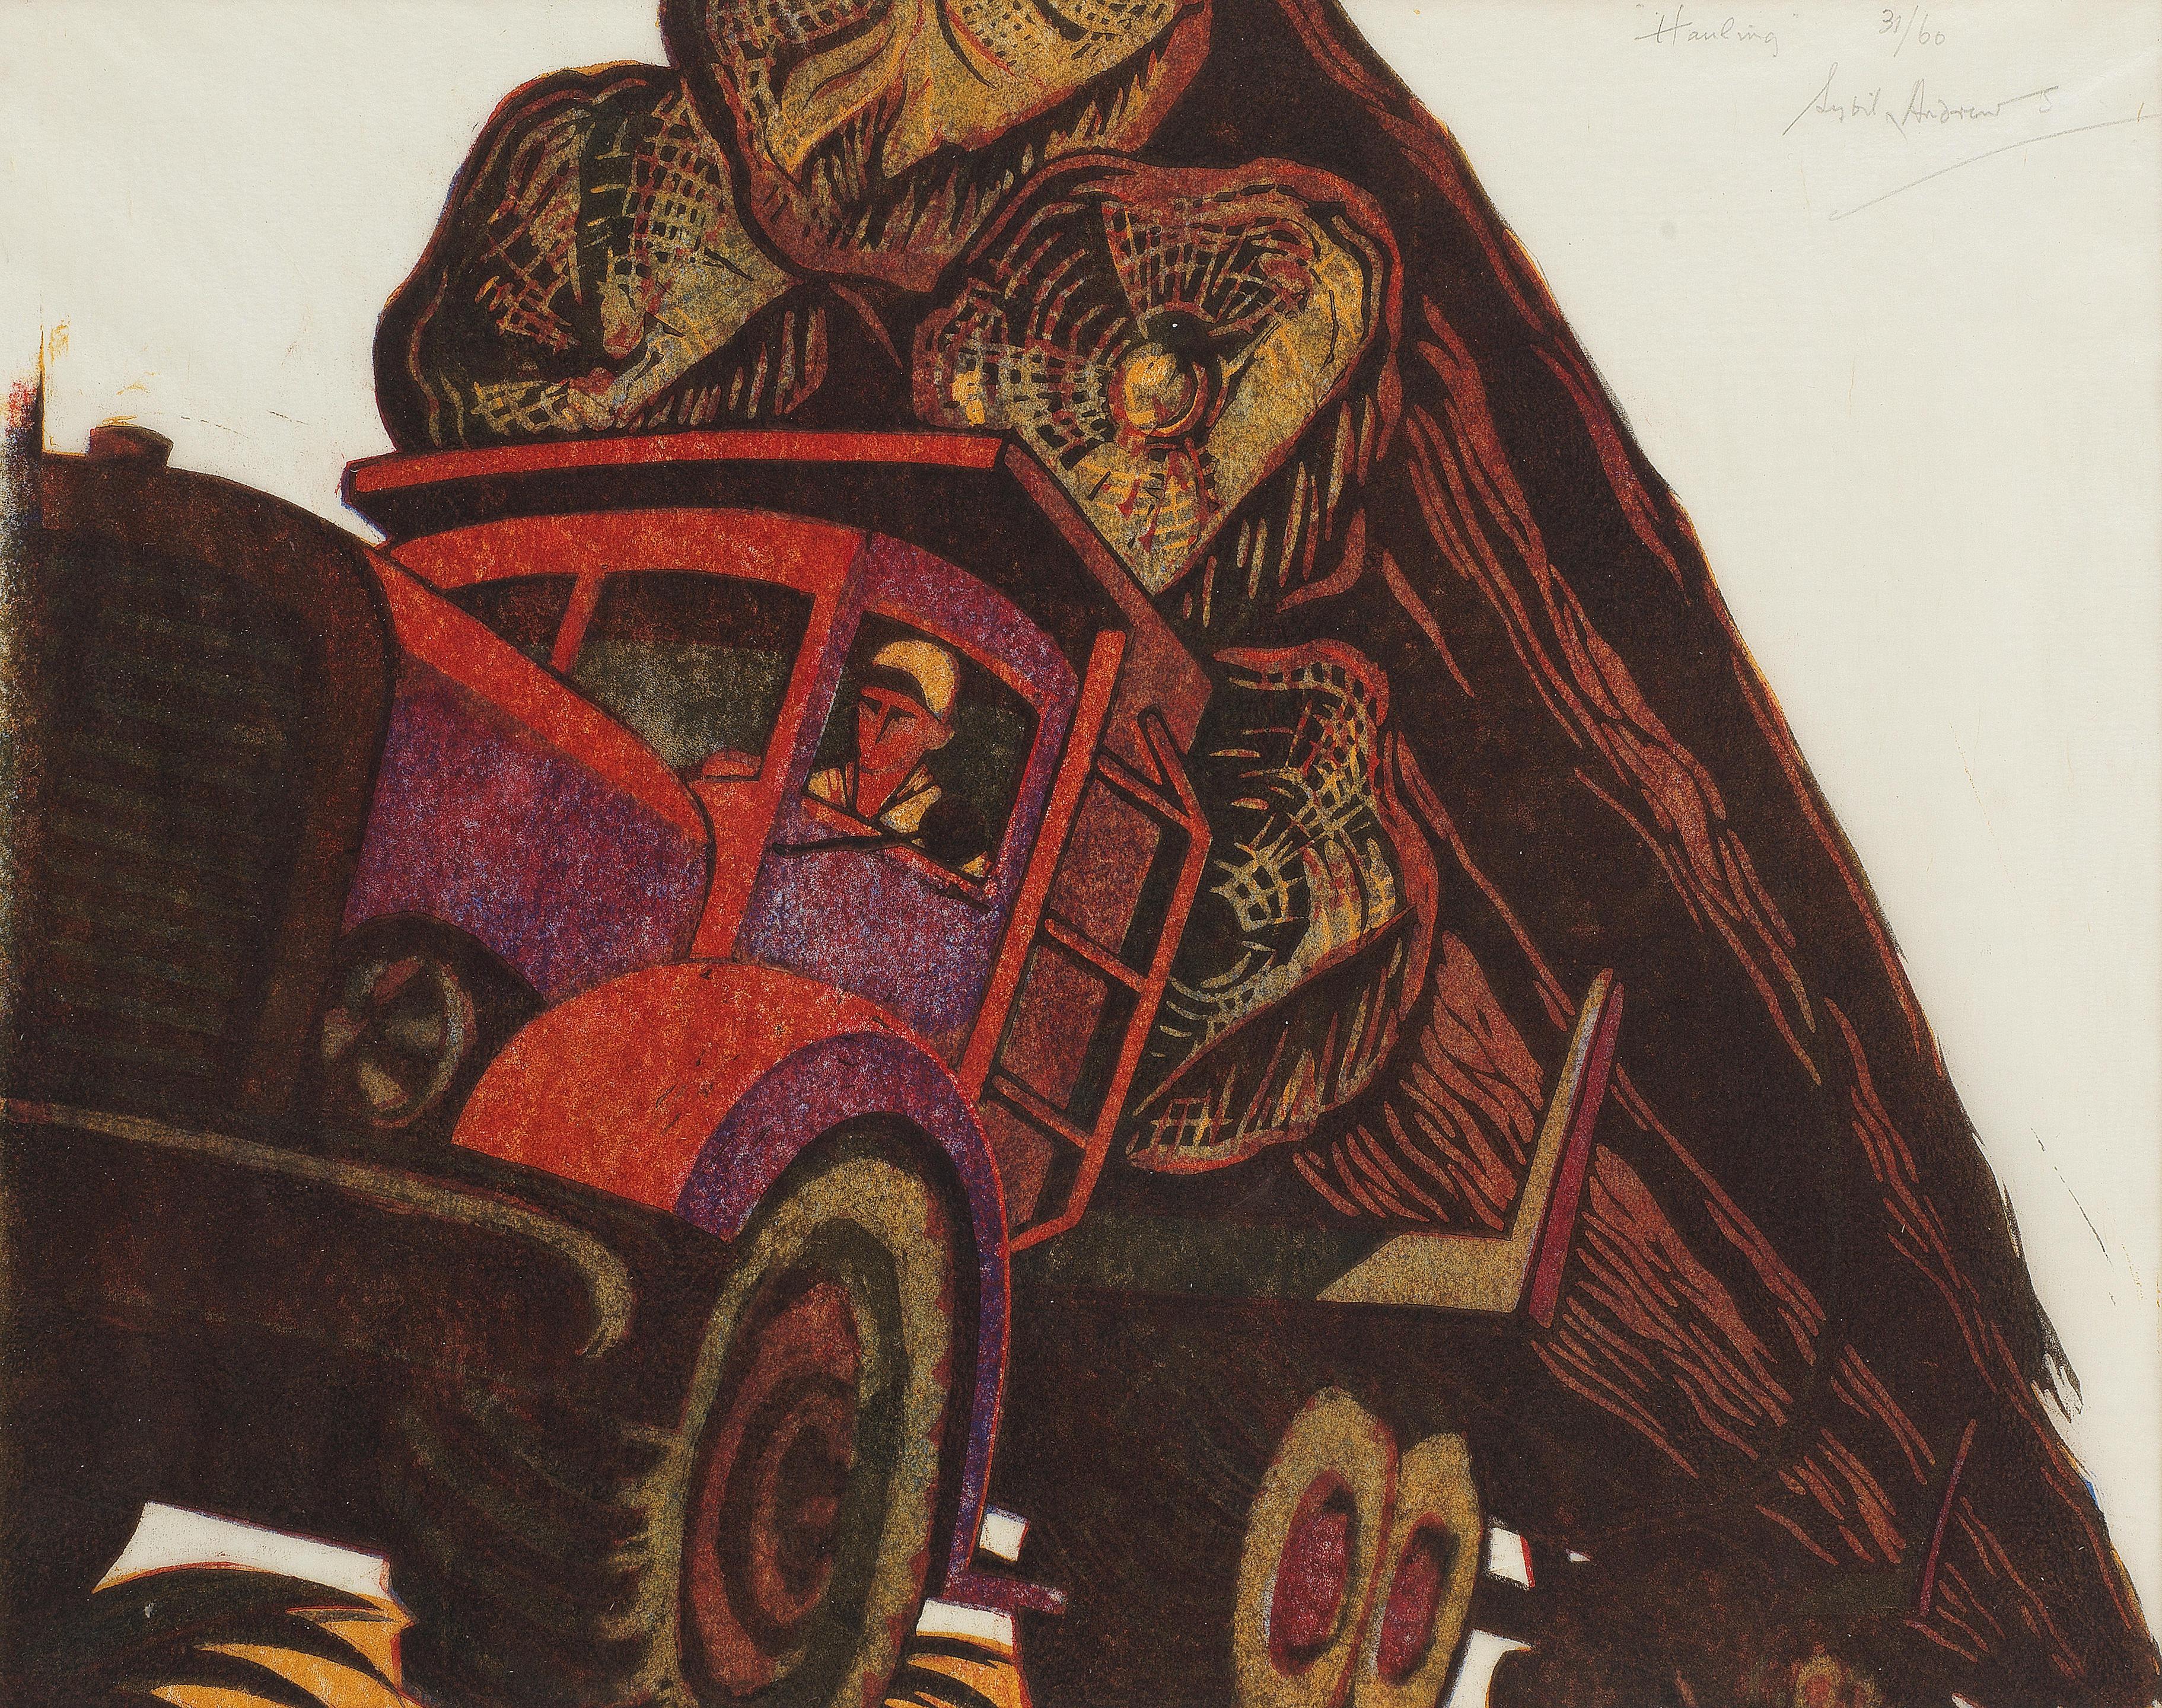 Hauling - Print by Sybil Andrews